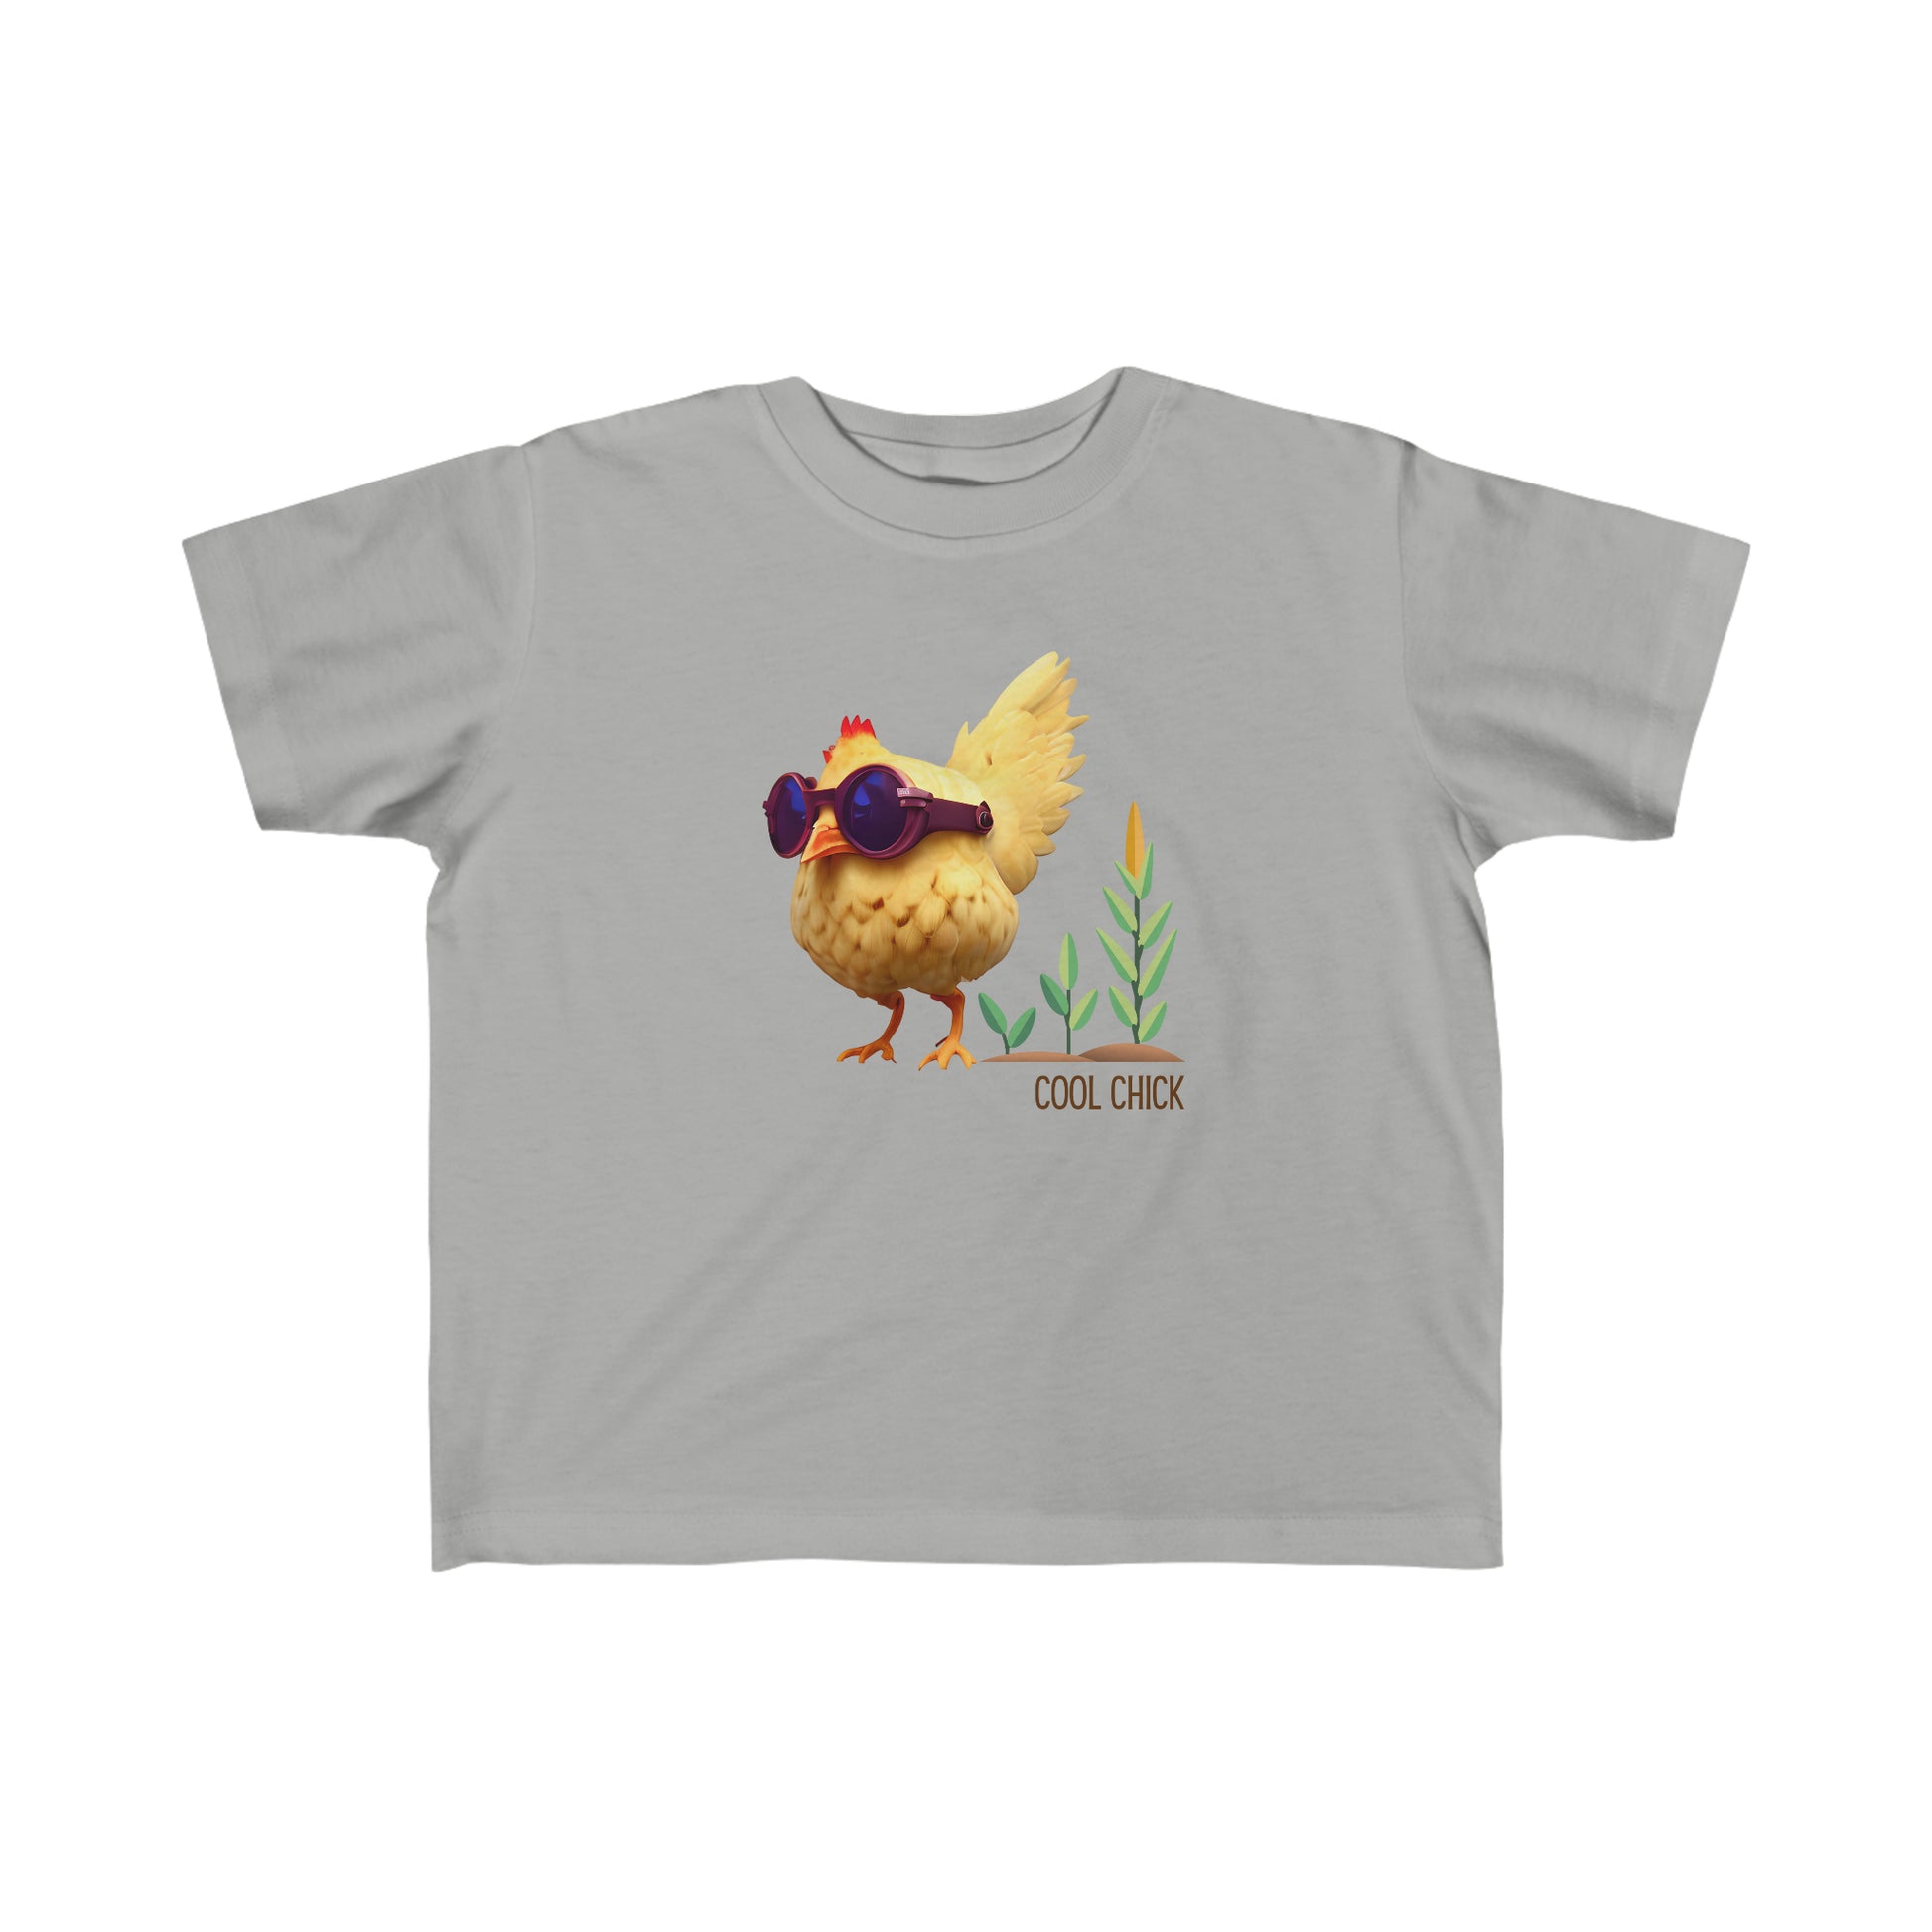 Cool Chick T-shirt in Heather Grey